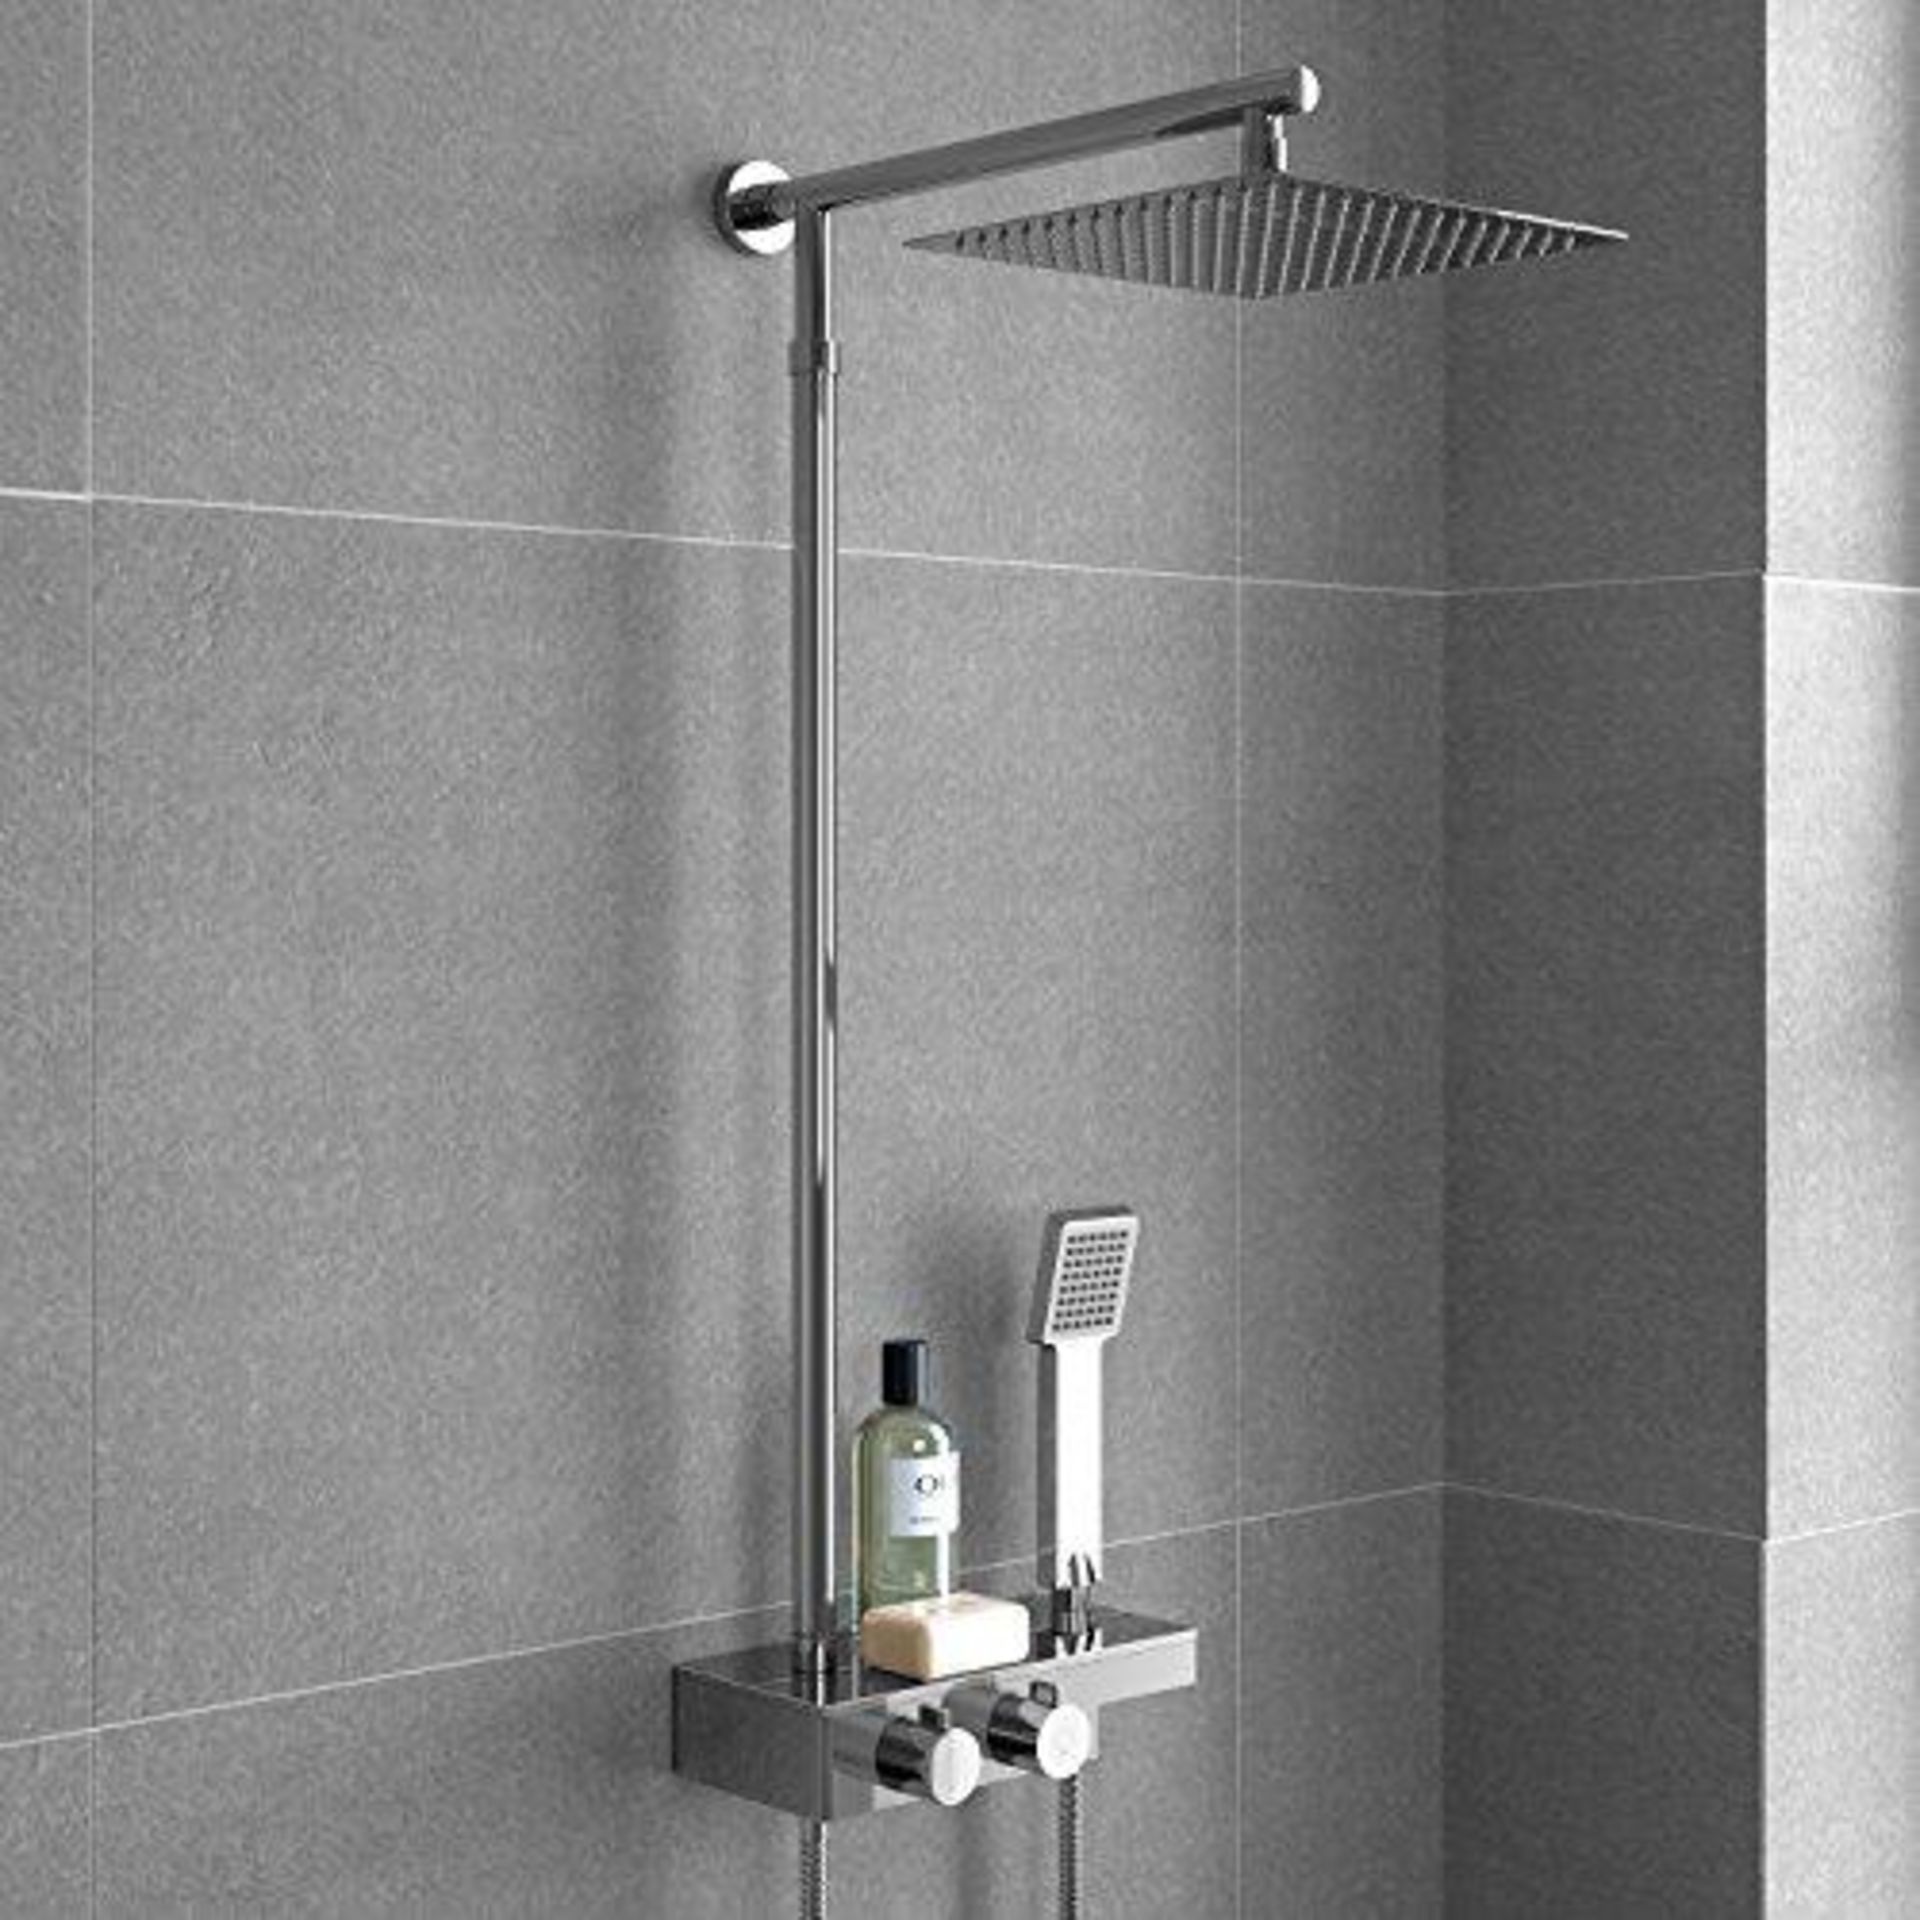 New & Boxed Square Thermostatic Bar Mixer Shower Set Valve With Shelf 10" Head + Handset. RRP £499. - Image 2 of 2